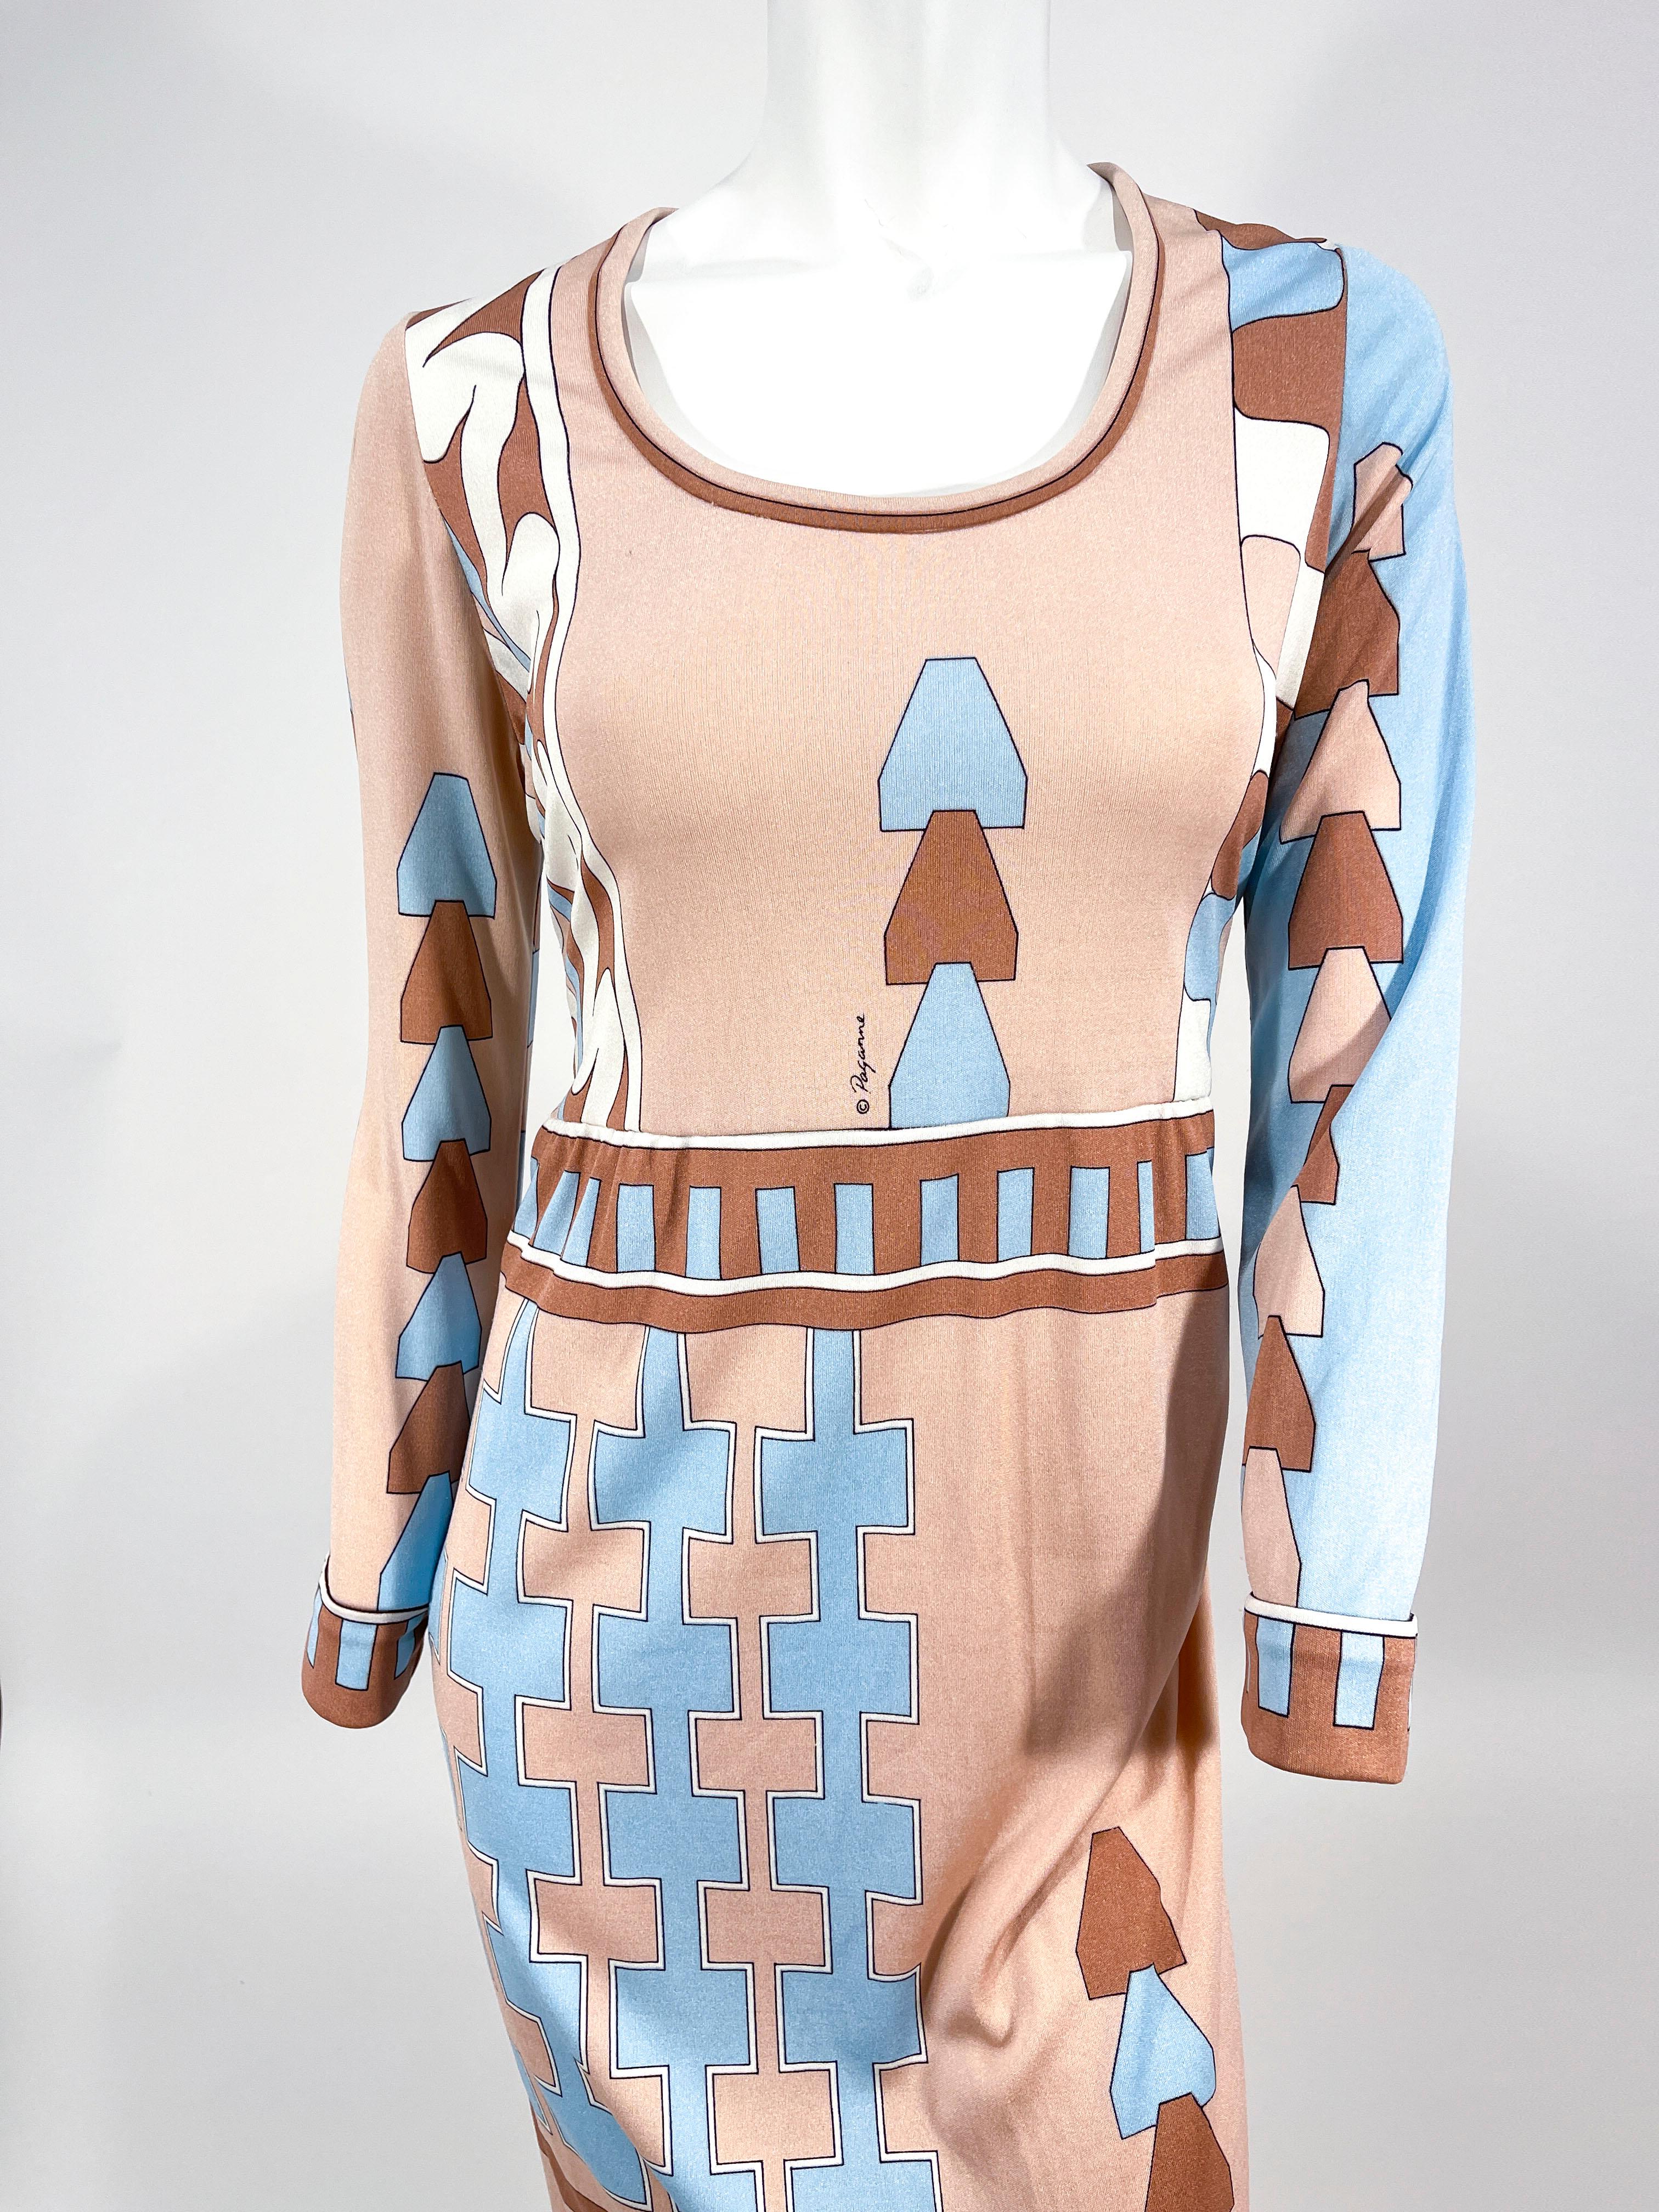 1970s Paganne silk jersey dress featuring an abstract geometric print in tones of mauve, tan, and light blue. There is a boarder print along the sleeves, bateau neckline, hem, and waist. This garment is unlined and has a zip back closure. 